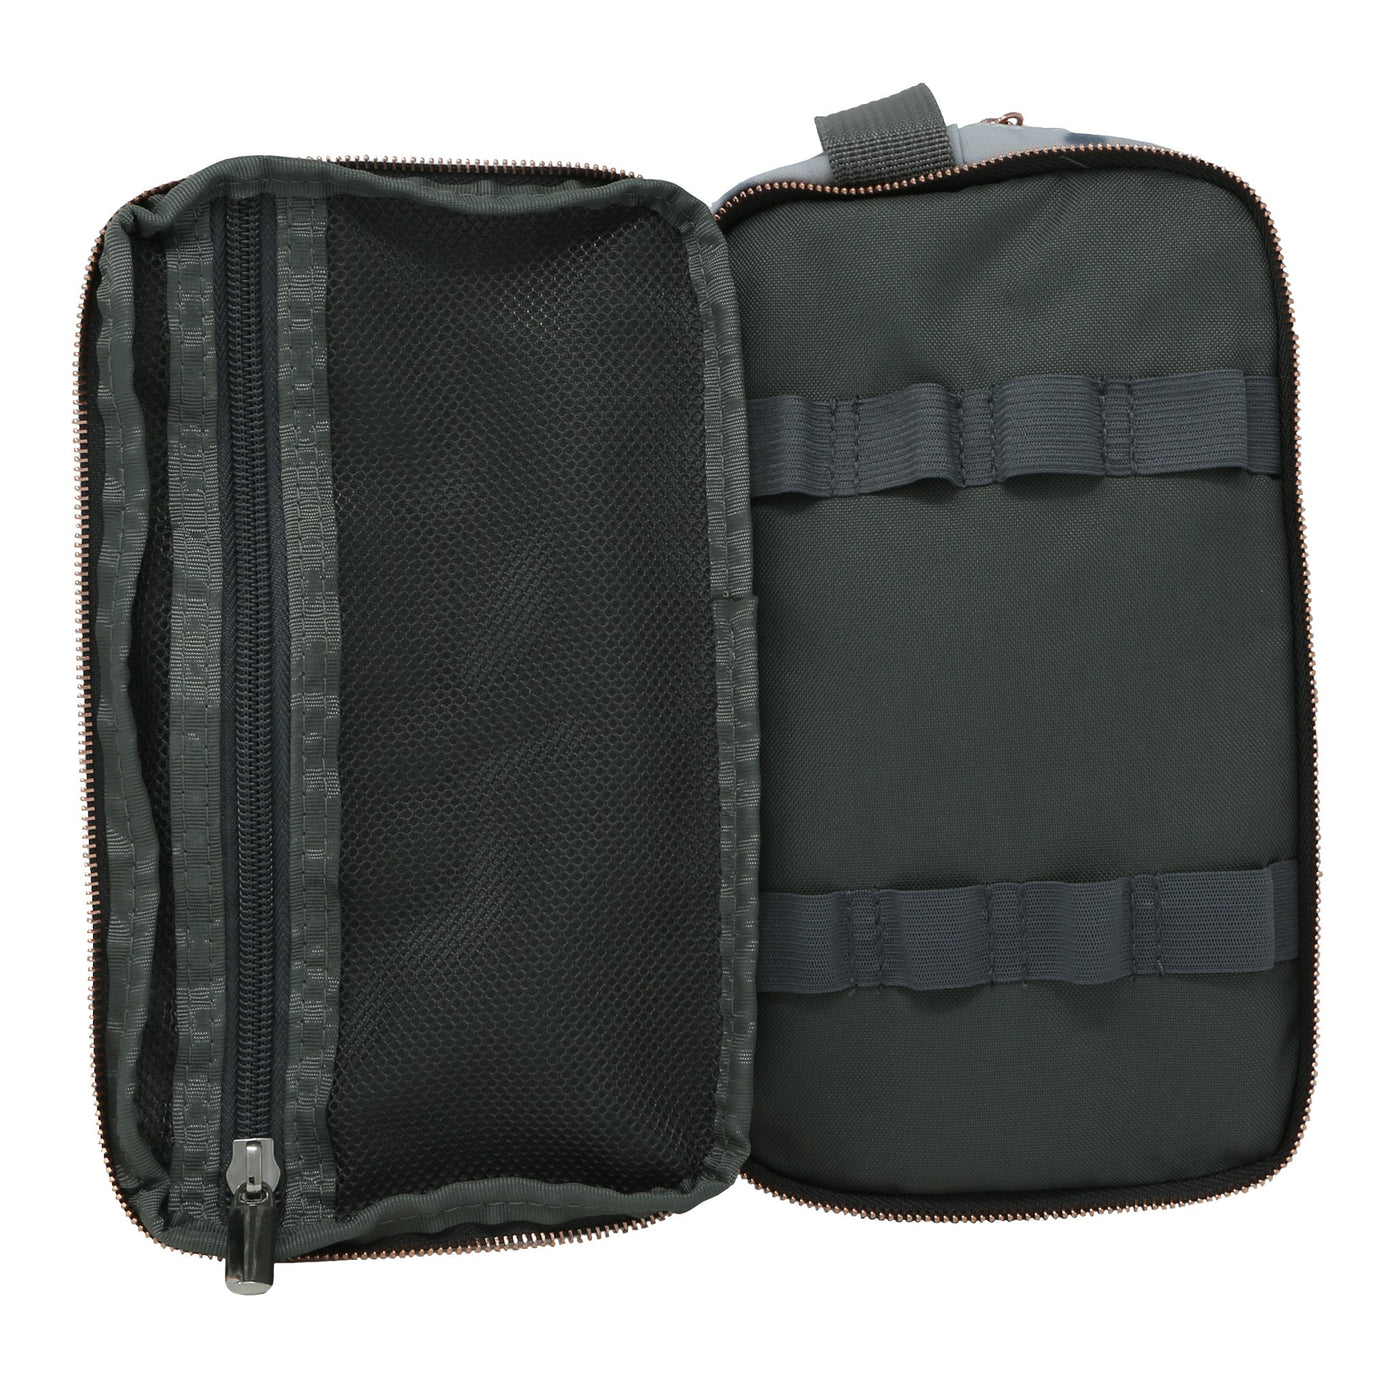 Traveller Toiletry Bag - Oil Life Canada - Canada's Best Essential Oil Supplies